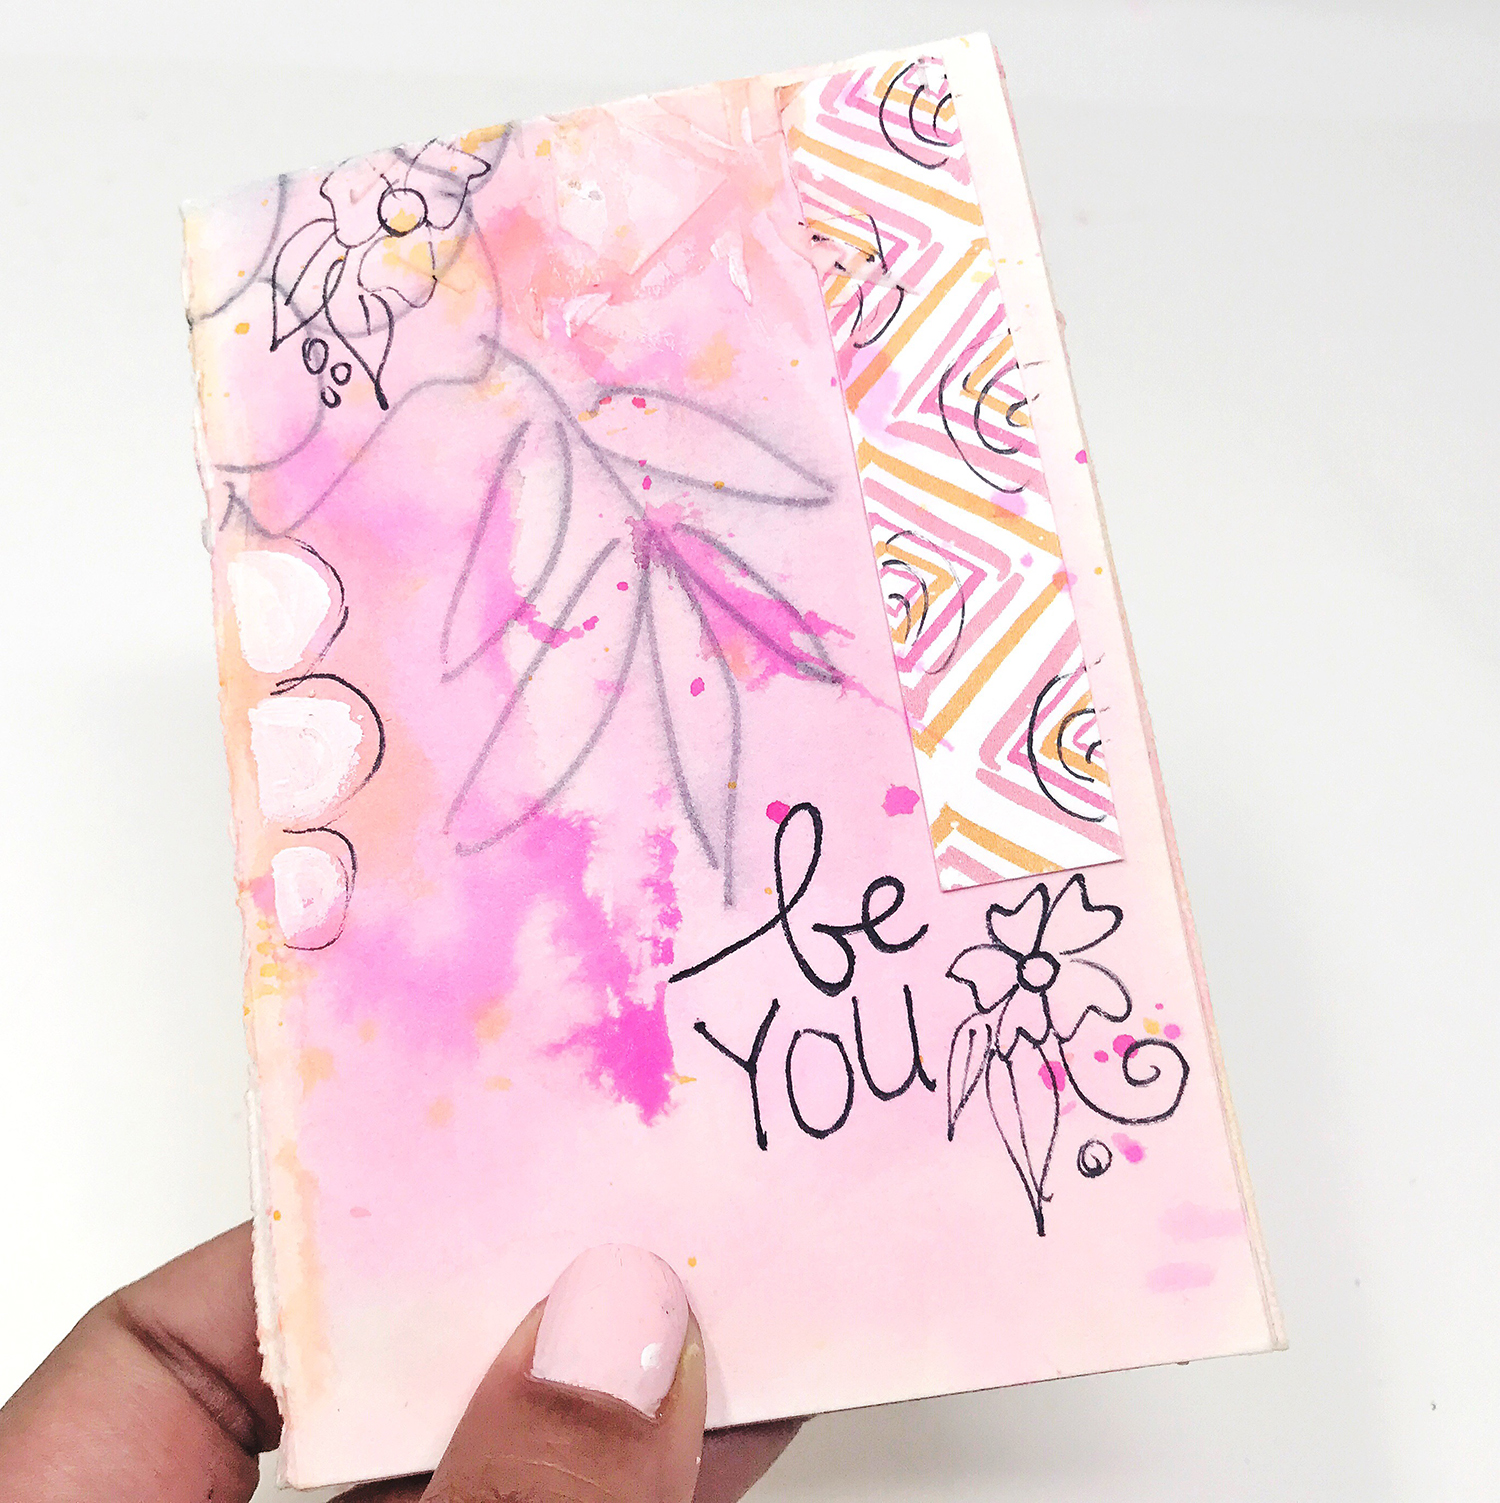 How to Make a Mini Art Journal from Scratch - Tombow USA Blog